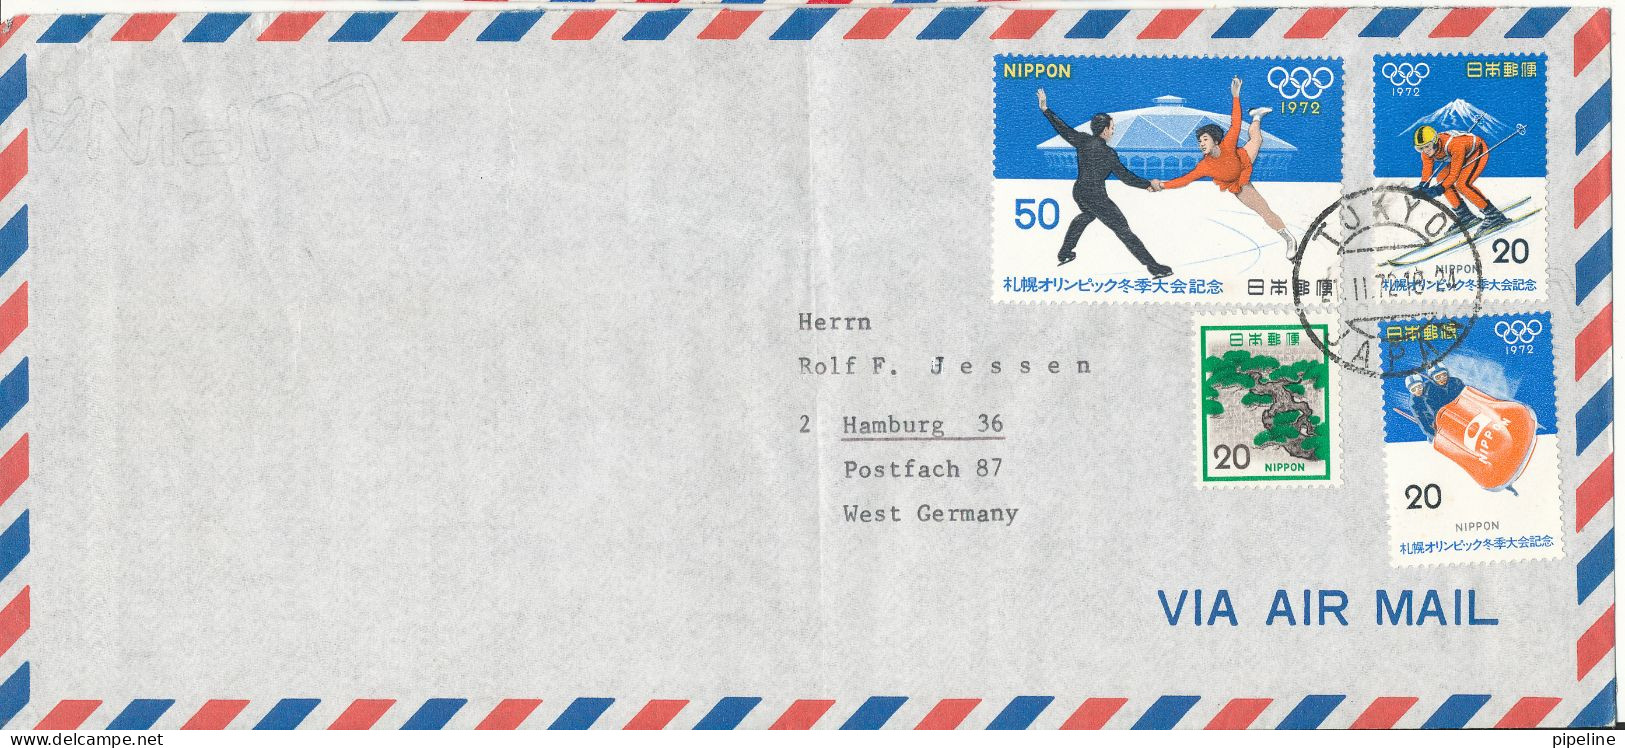 Japan Air Mail Cover Sent To Germany 2-11-1972 With More Topic Stamps Folded Cover - Posta Aerea